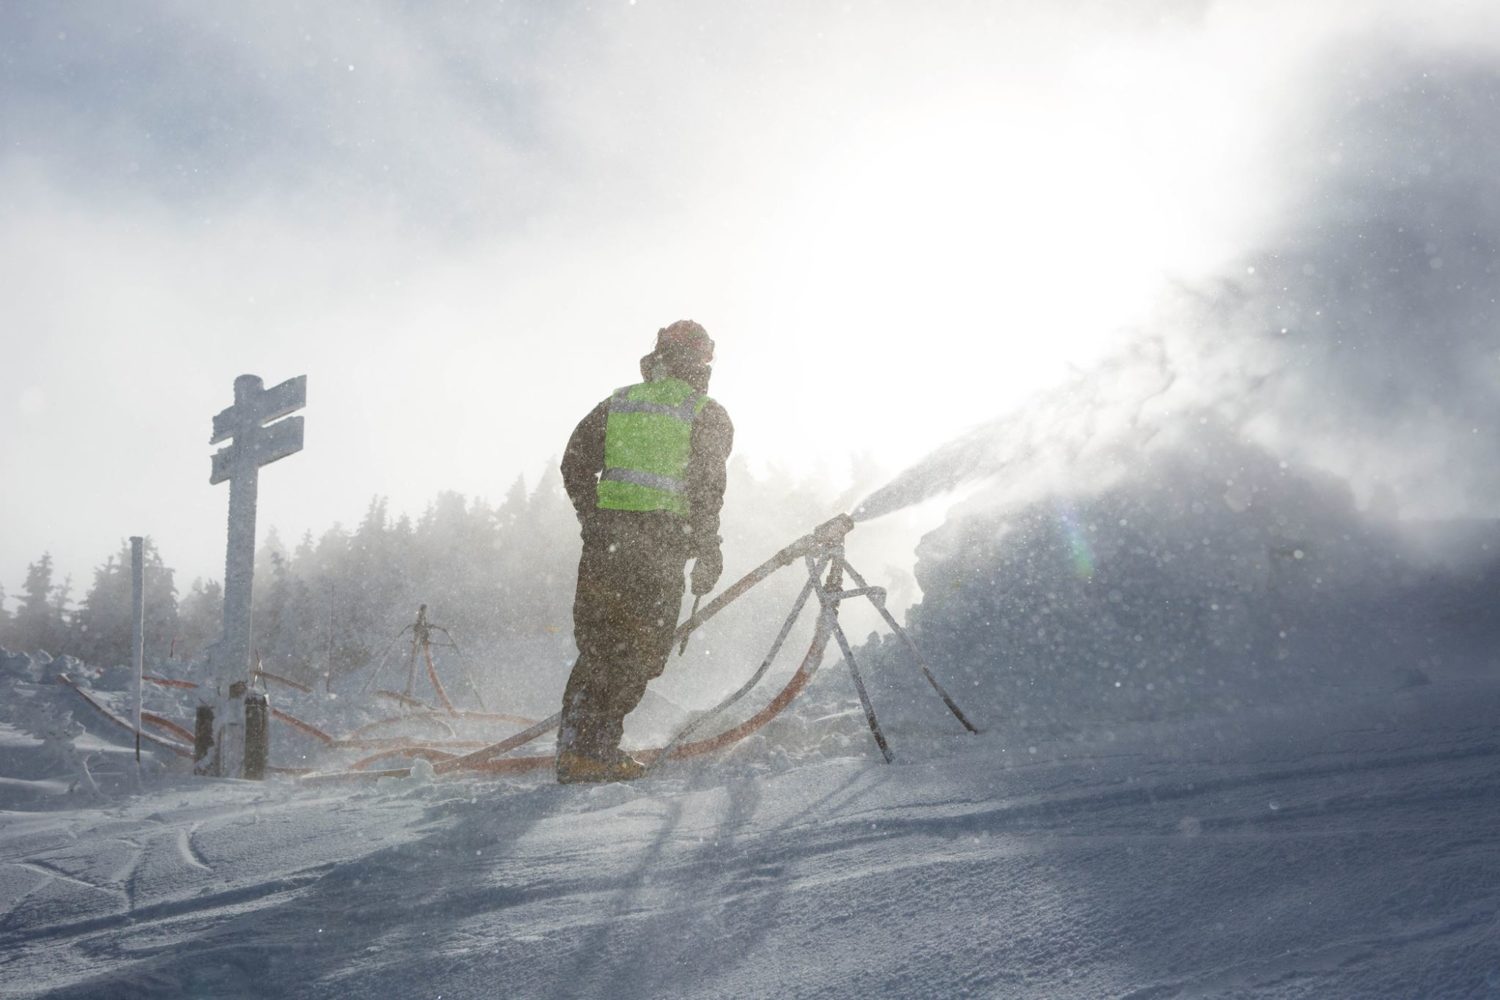 Killington has one of the best snowmaking operations in the industry